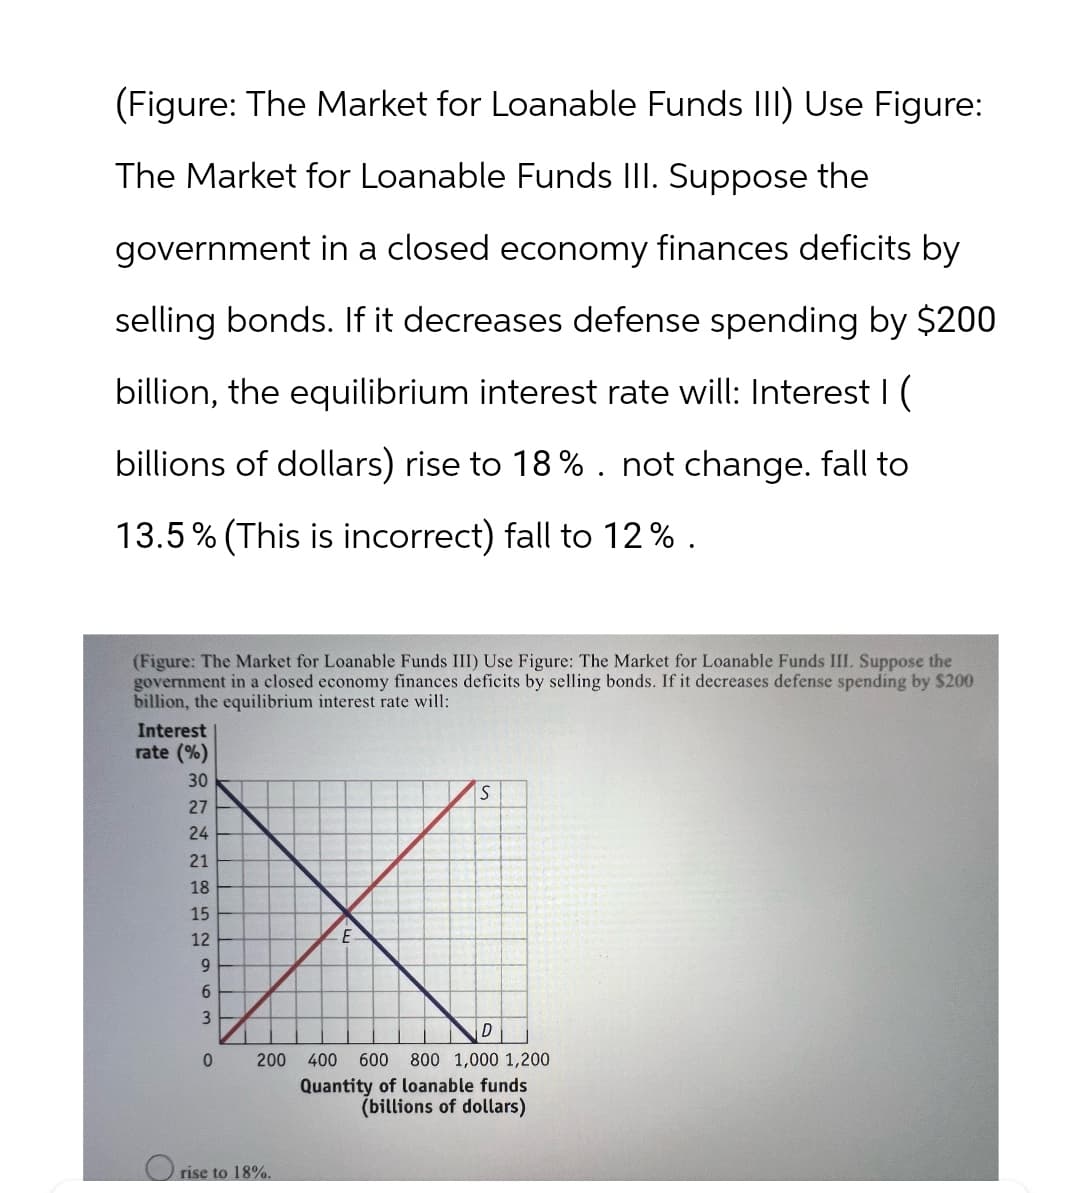 (Figure: The Market for Loanable Funds III) Use Figure:
The Market for Loanable Funds III. Suppose the
government in a closed economy finances deficits by
selling bonds. If it decreases defense spending by $200
billion, the equilibrium interest rate will: Interest | (
billions of dollars) rise to 18%. not change. fall to
13.5% (This is incorrect) fall to 12% .
(Figure: The Market for Loanable Funds III) Use Figure: The Market for Loanable Funds III. Suppose the
government in a closed economy finances deficits by selling bonds. If it decreases defense spending by $200
billion, the equilibrium interest rate will:
Interest
rate (%)
30
27
21
18
2222
24
15
12
E
9
6
3
0
200
rise to 18%.
S
D
400 600 800 1,000 1,200
Quantity of loanable funds
(billions of dollars)